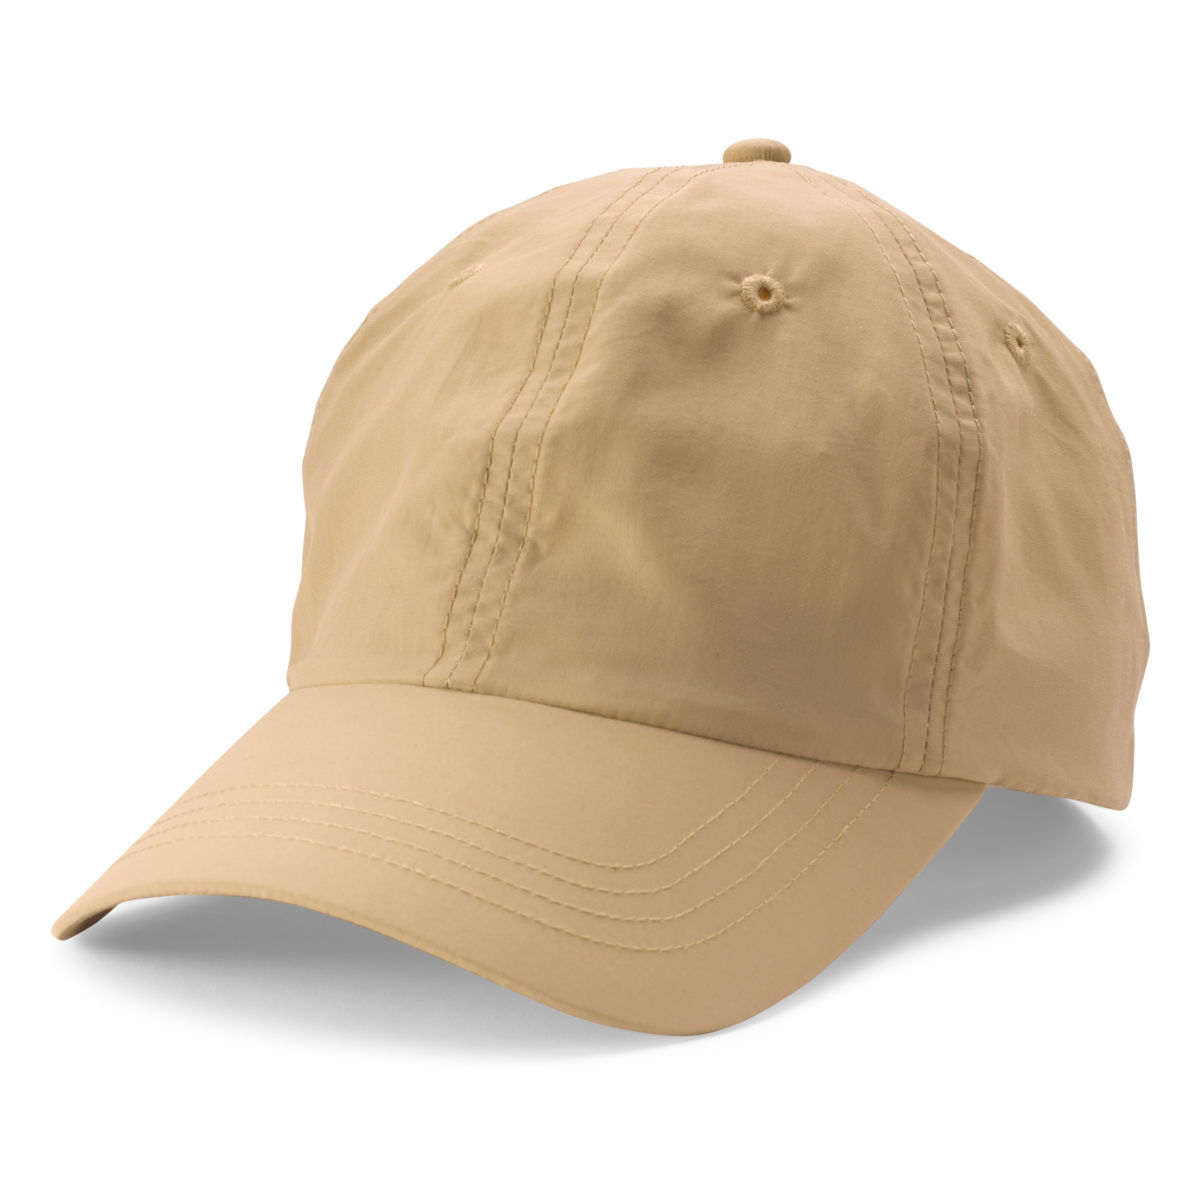 OutSmart® Ball Cap - KHAKIimage number 0